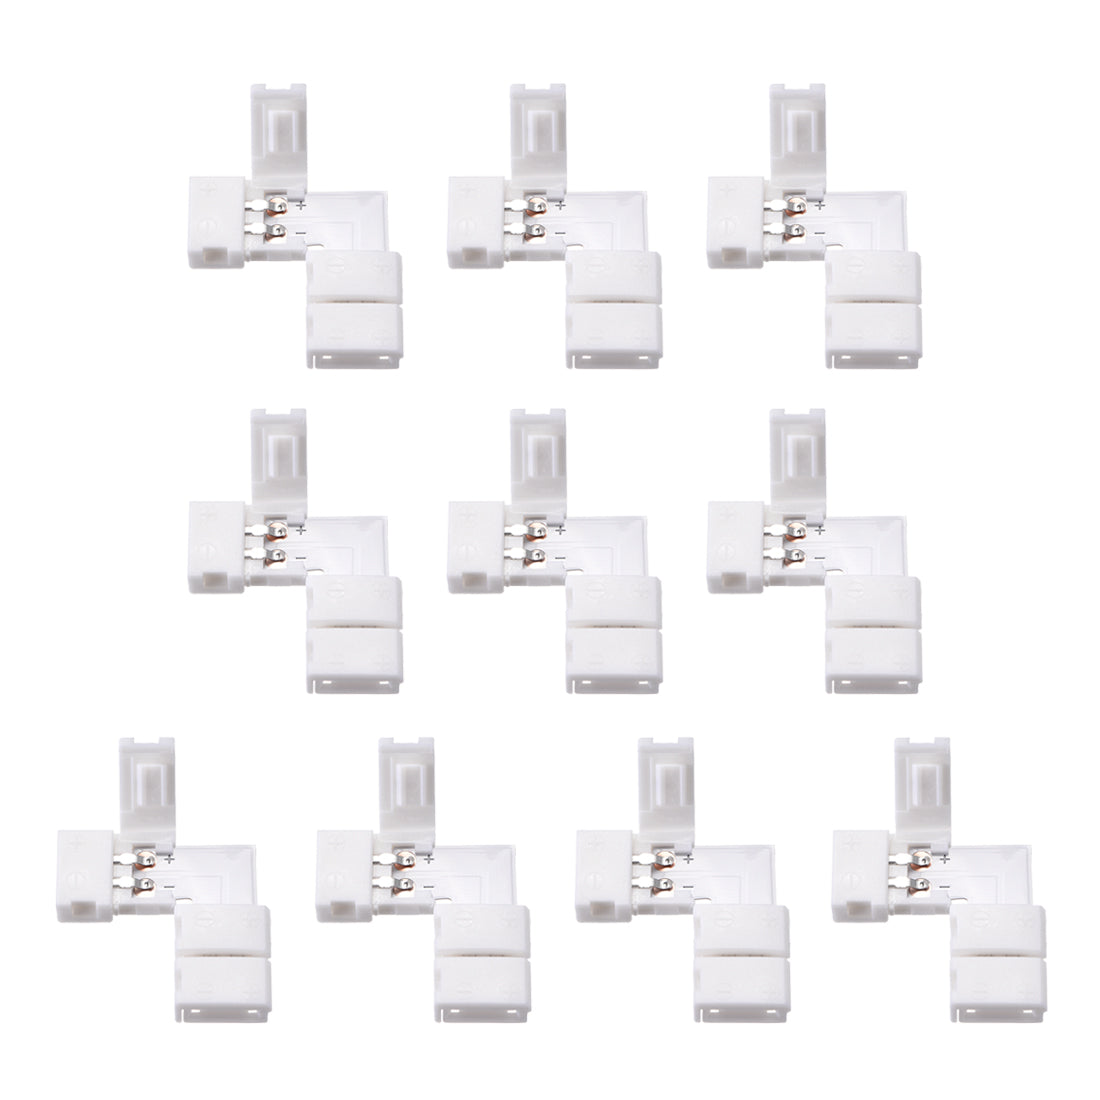 Uxcell Uxcell 8mm 2P L-shape LED Strip Connector Right Angle Corner Connectors for Single Color 3528 2 Conductor LED Strip Lights Strip to Strip 15Pcs